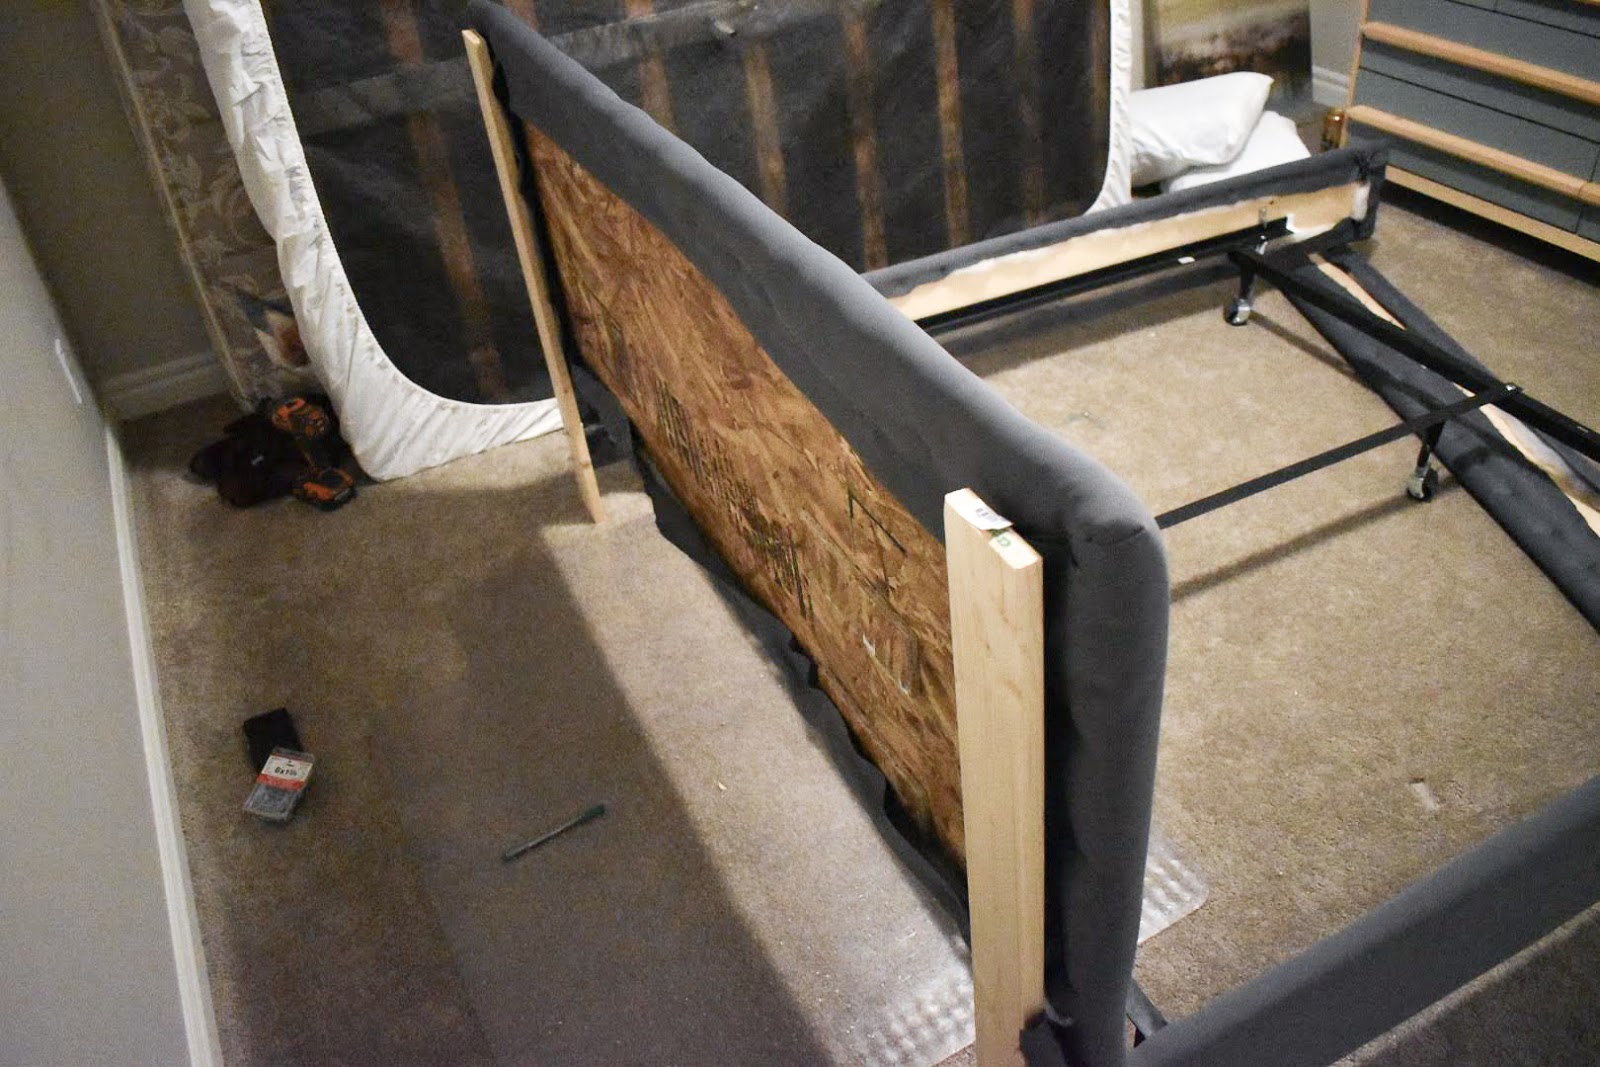 Metal Bed Frame Into An Upholstered, How Does A Headboard Attach To Metal Frame